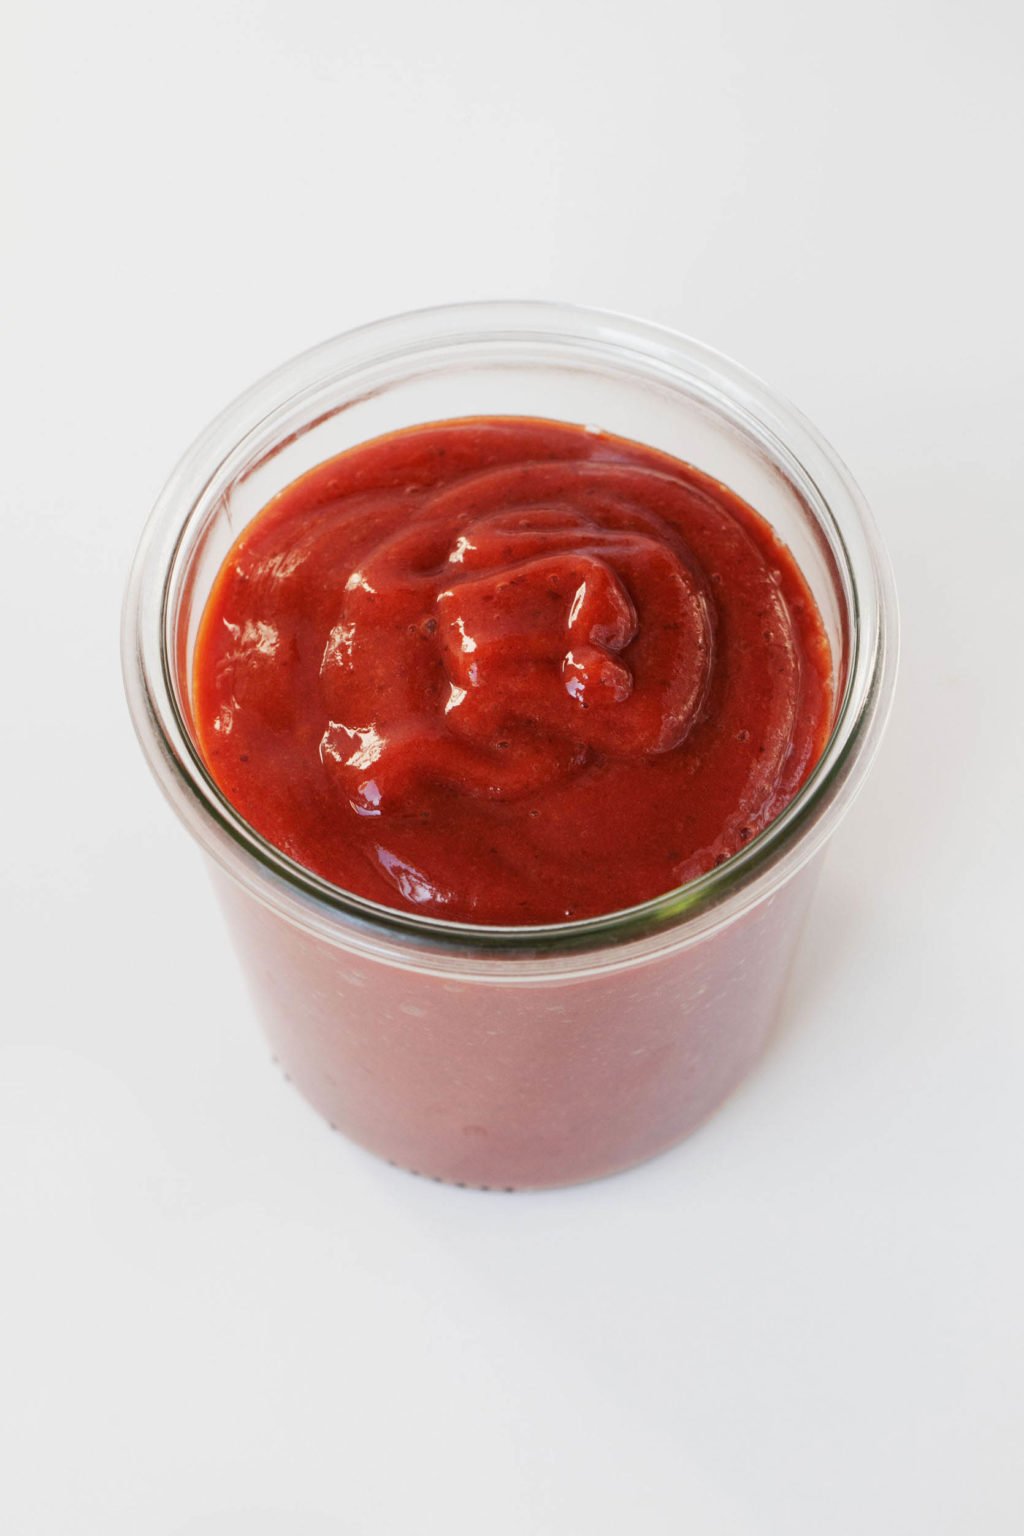 An overhead image of a red orange, vegan date BBQ sauce. It is held in a glass jar and rests on a while surface.